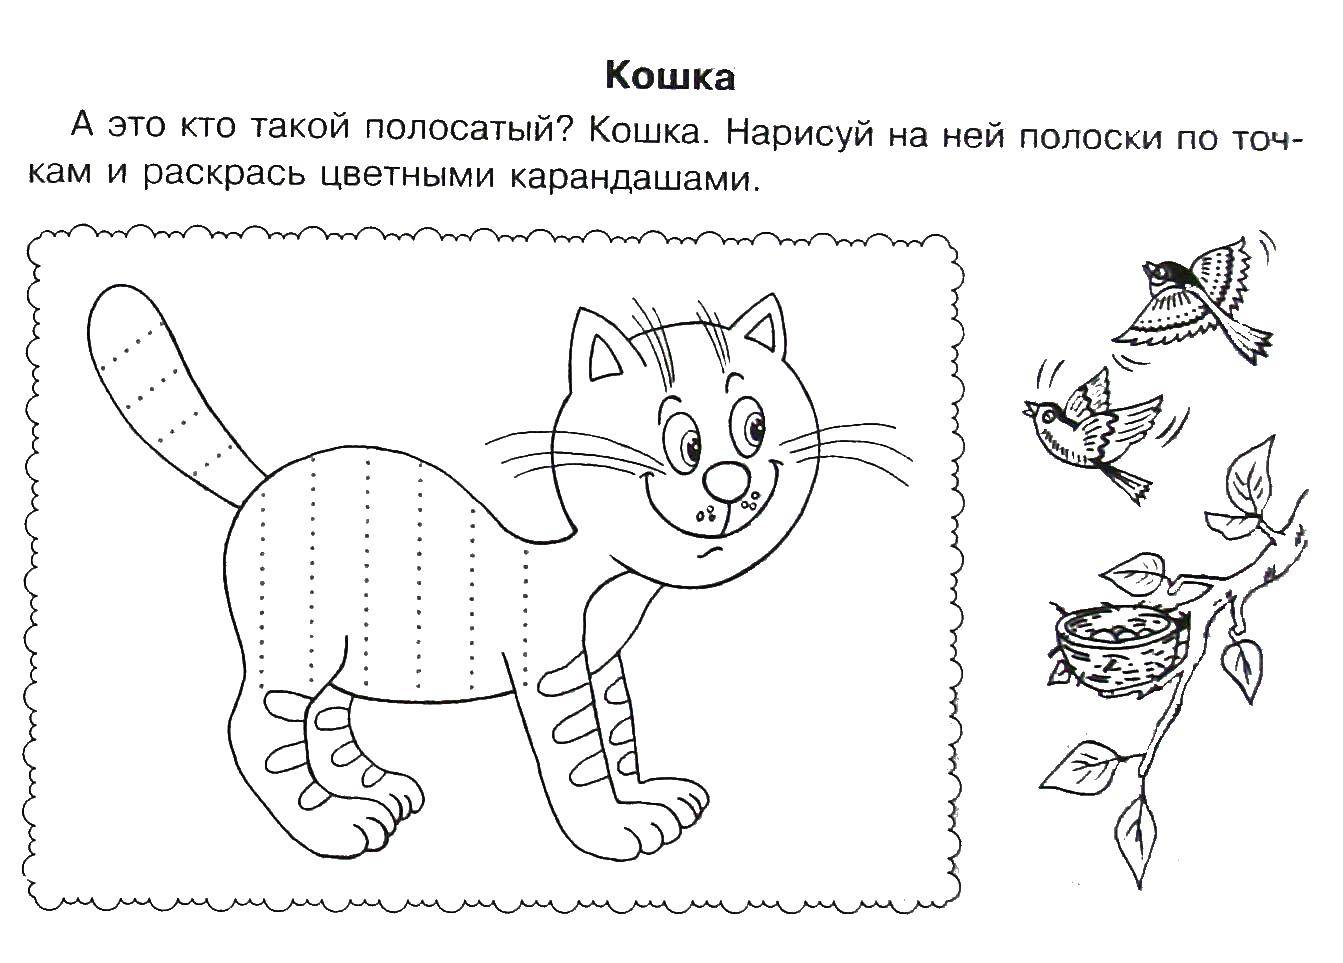 Coloring Draw stripes. Category Crosshatch for preschoolers. Tags:  Teaching coloring, logic.